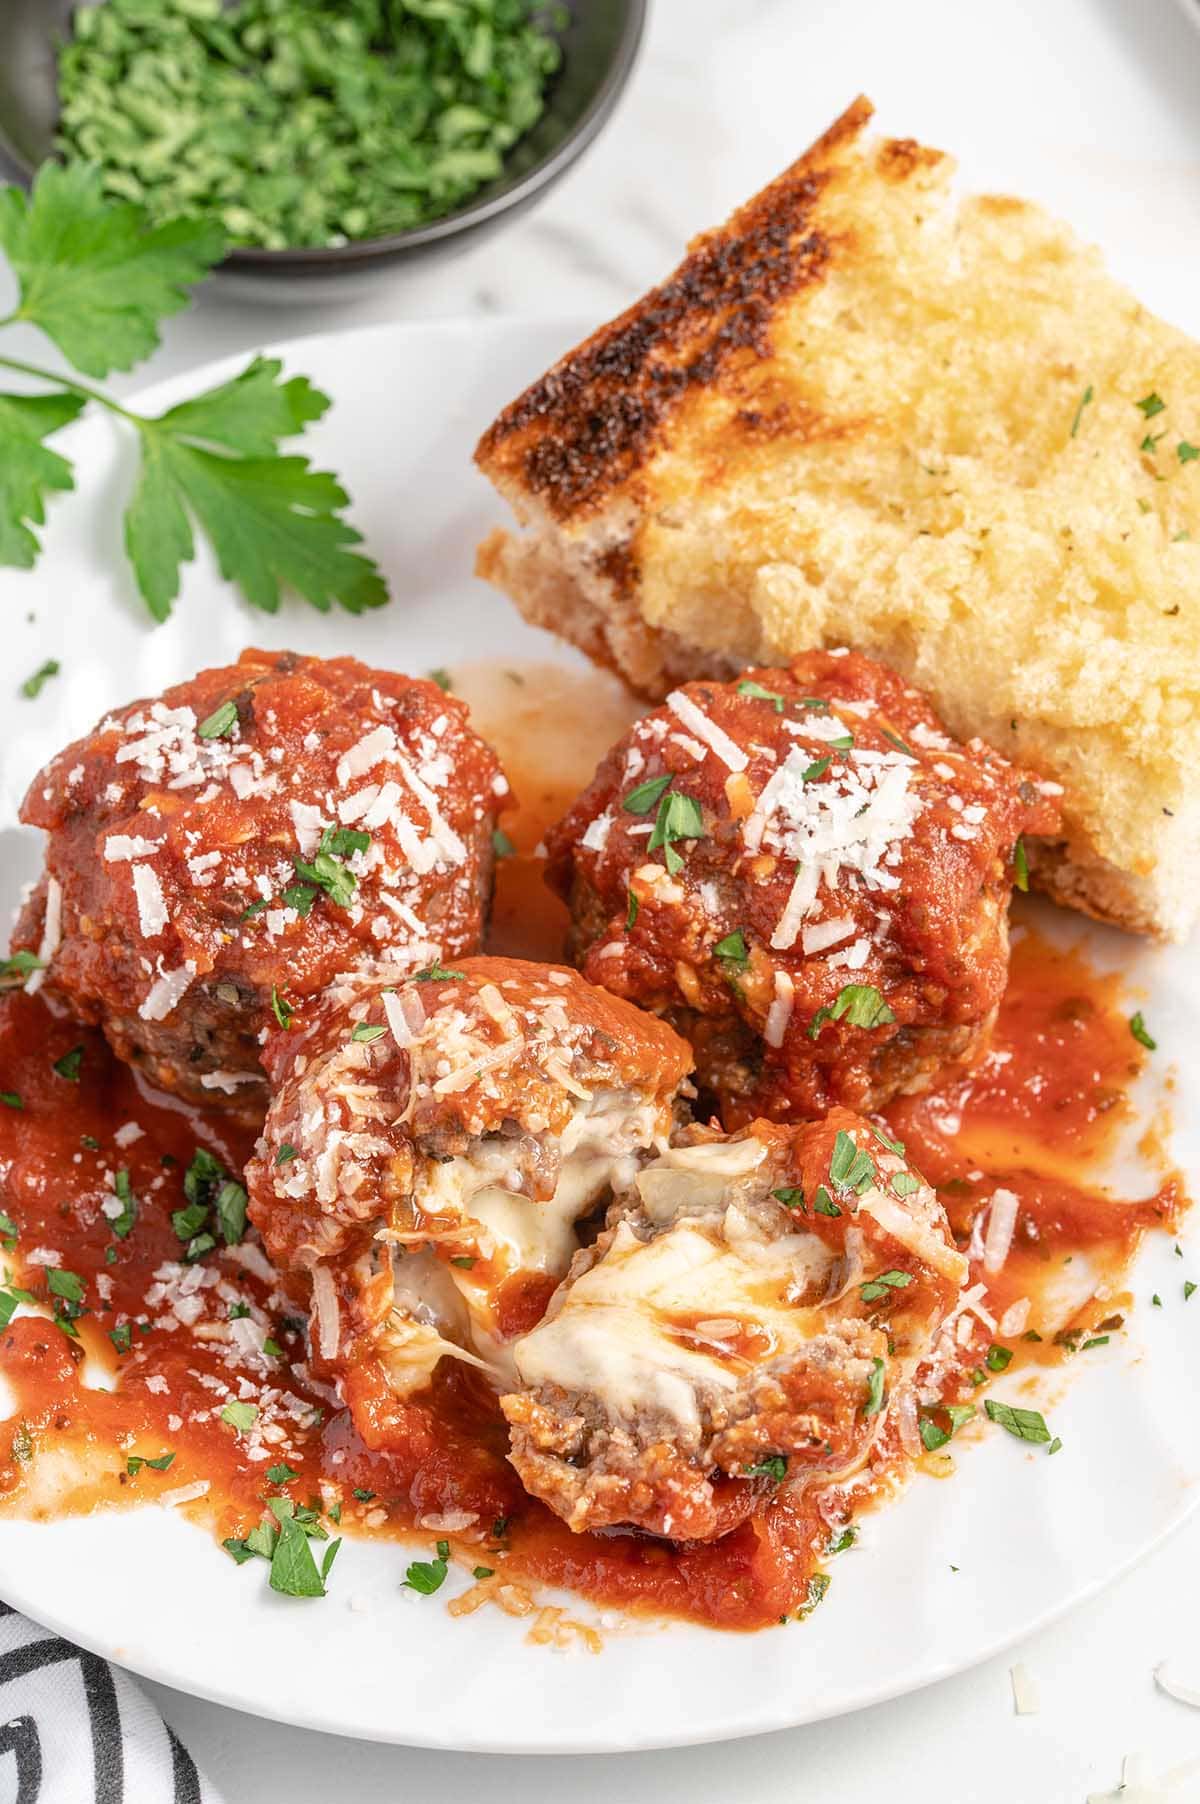 showing the inside of Cheese Stuffed Meatballs